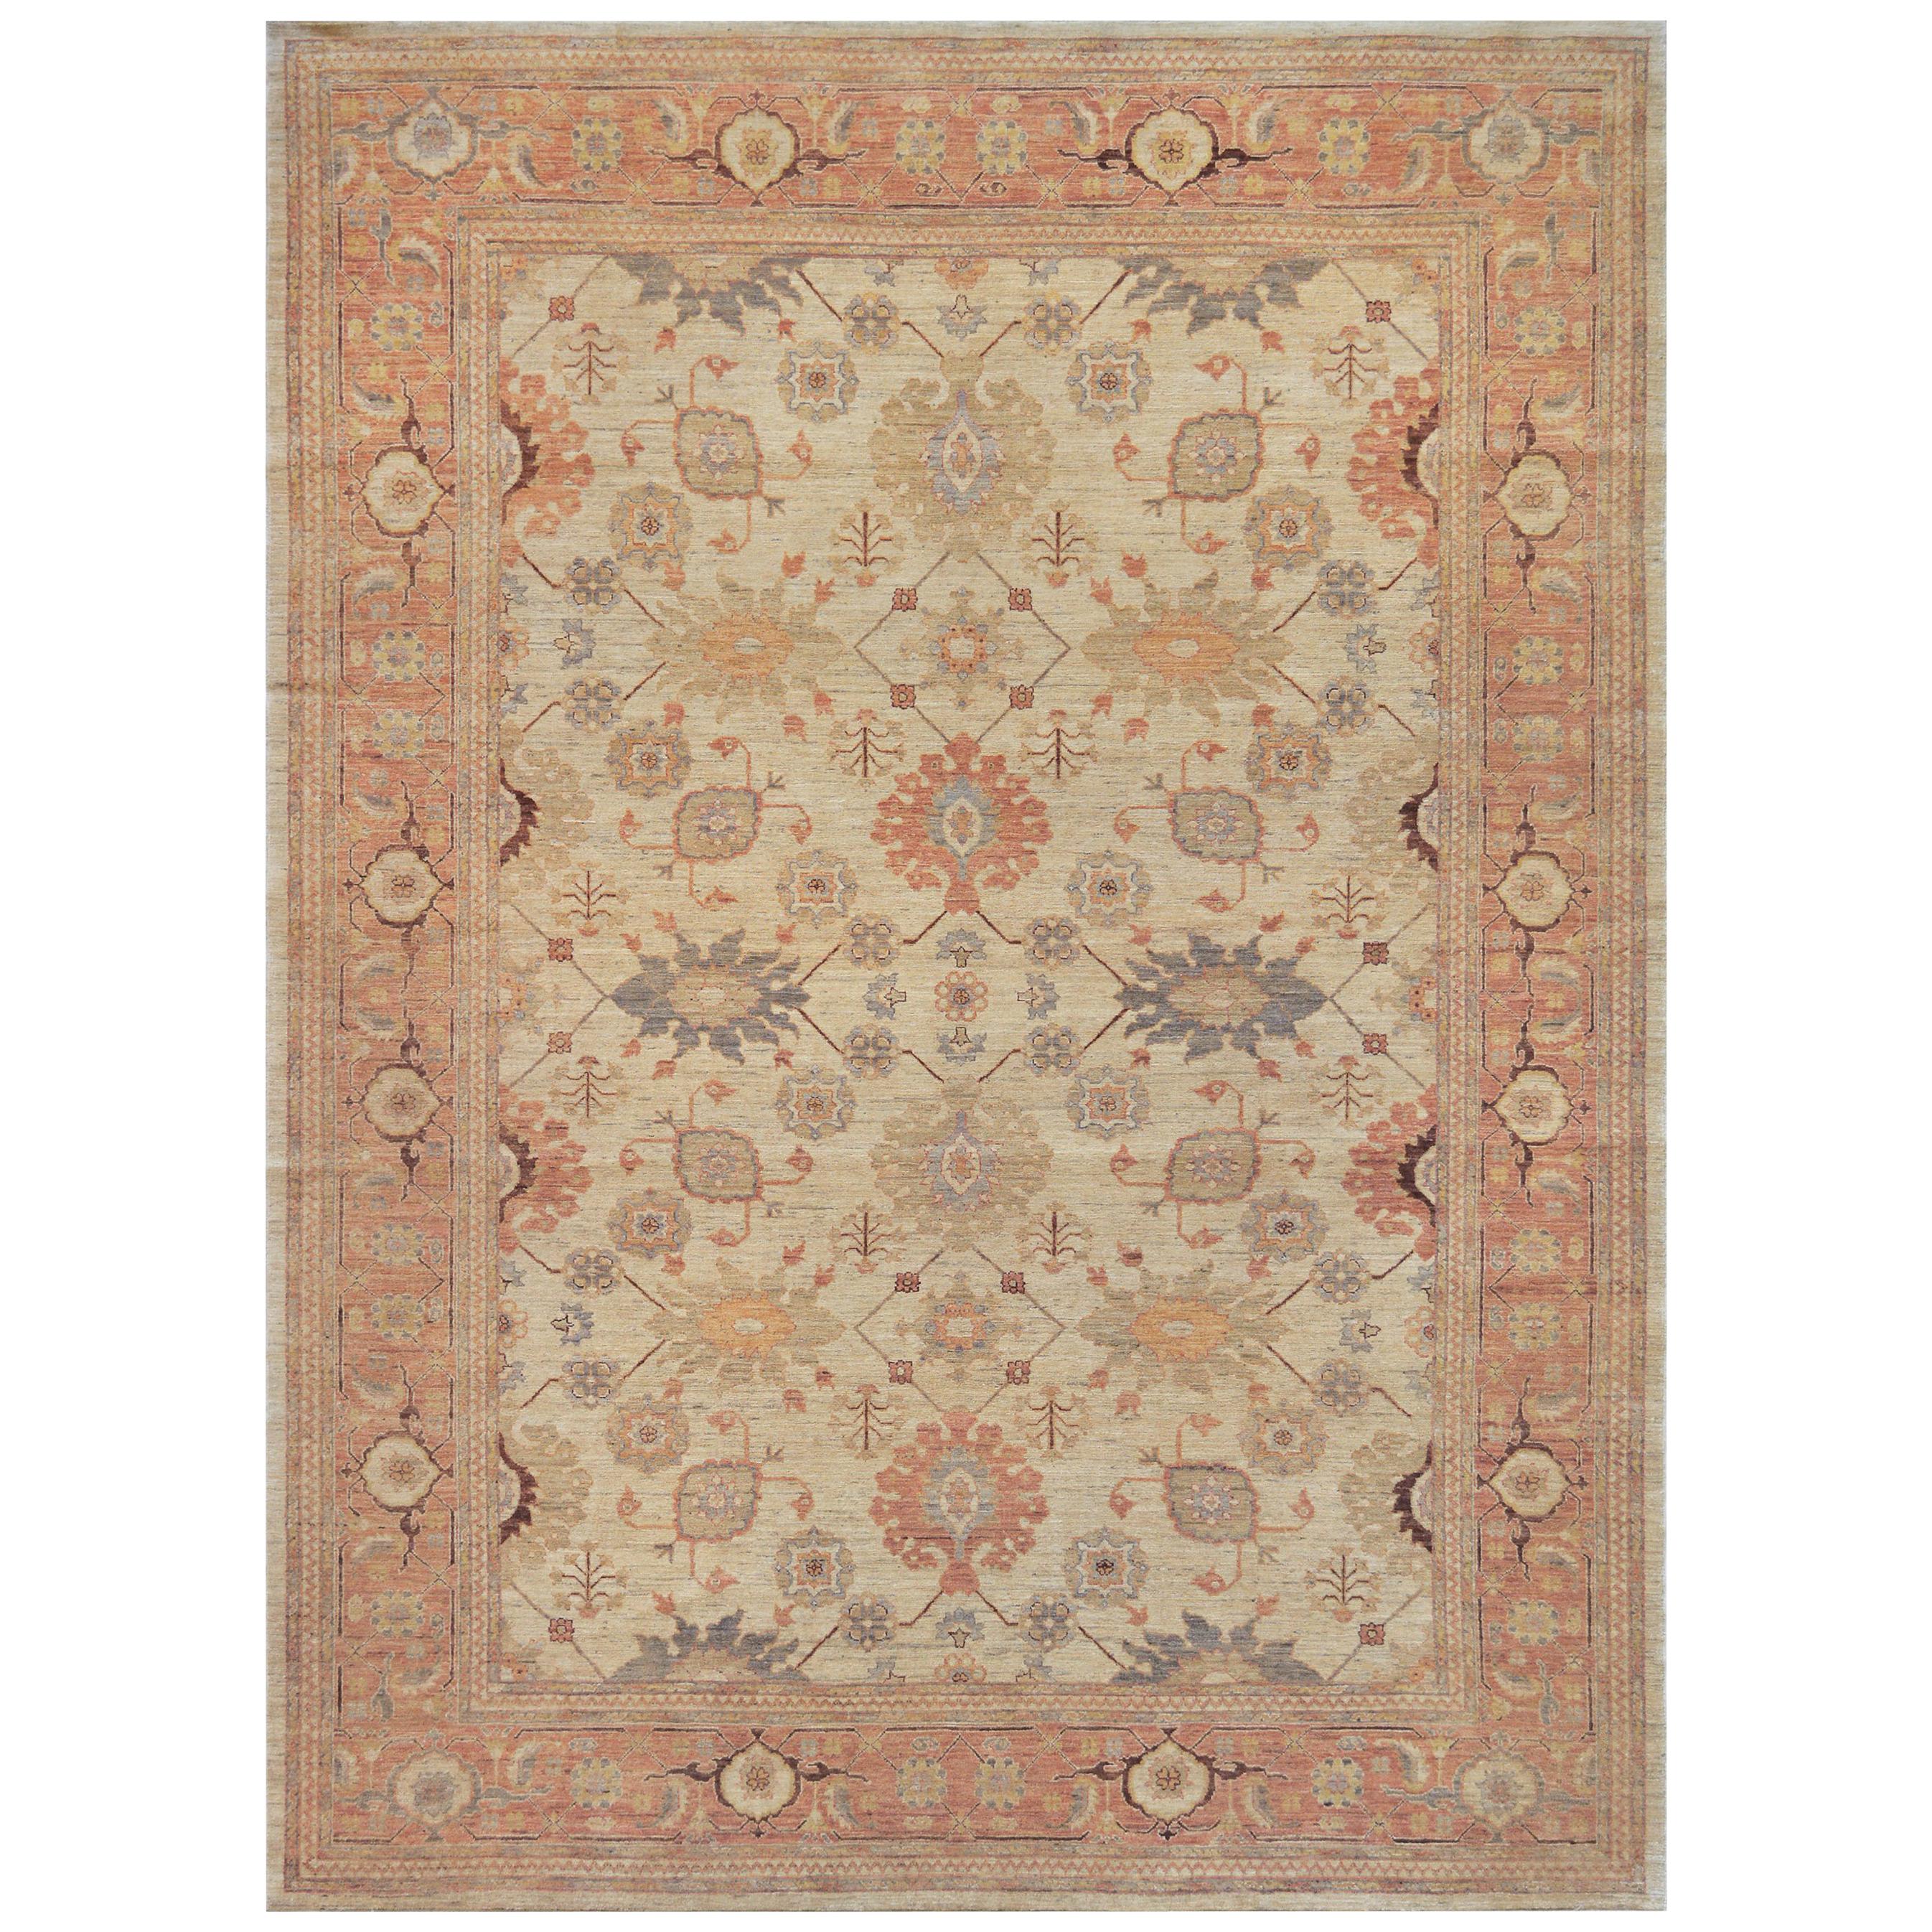 Mansour Quality Persian Handwoven Agra Rug